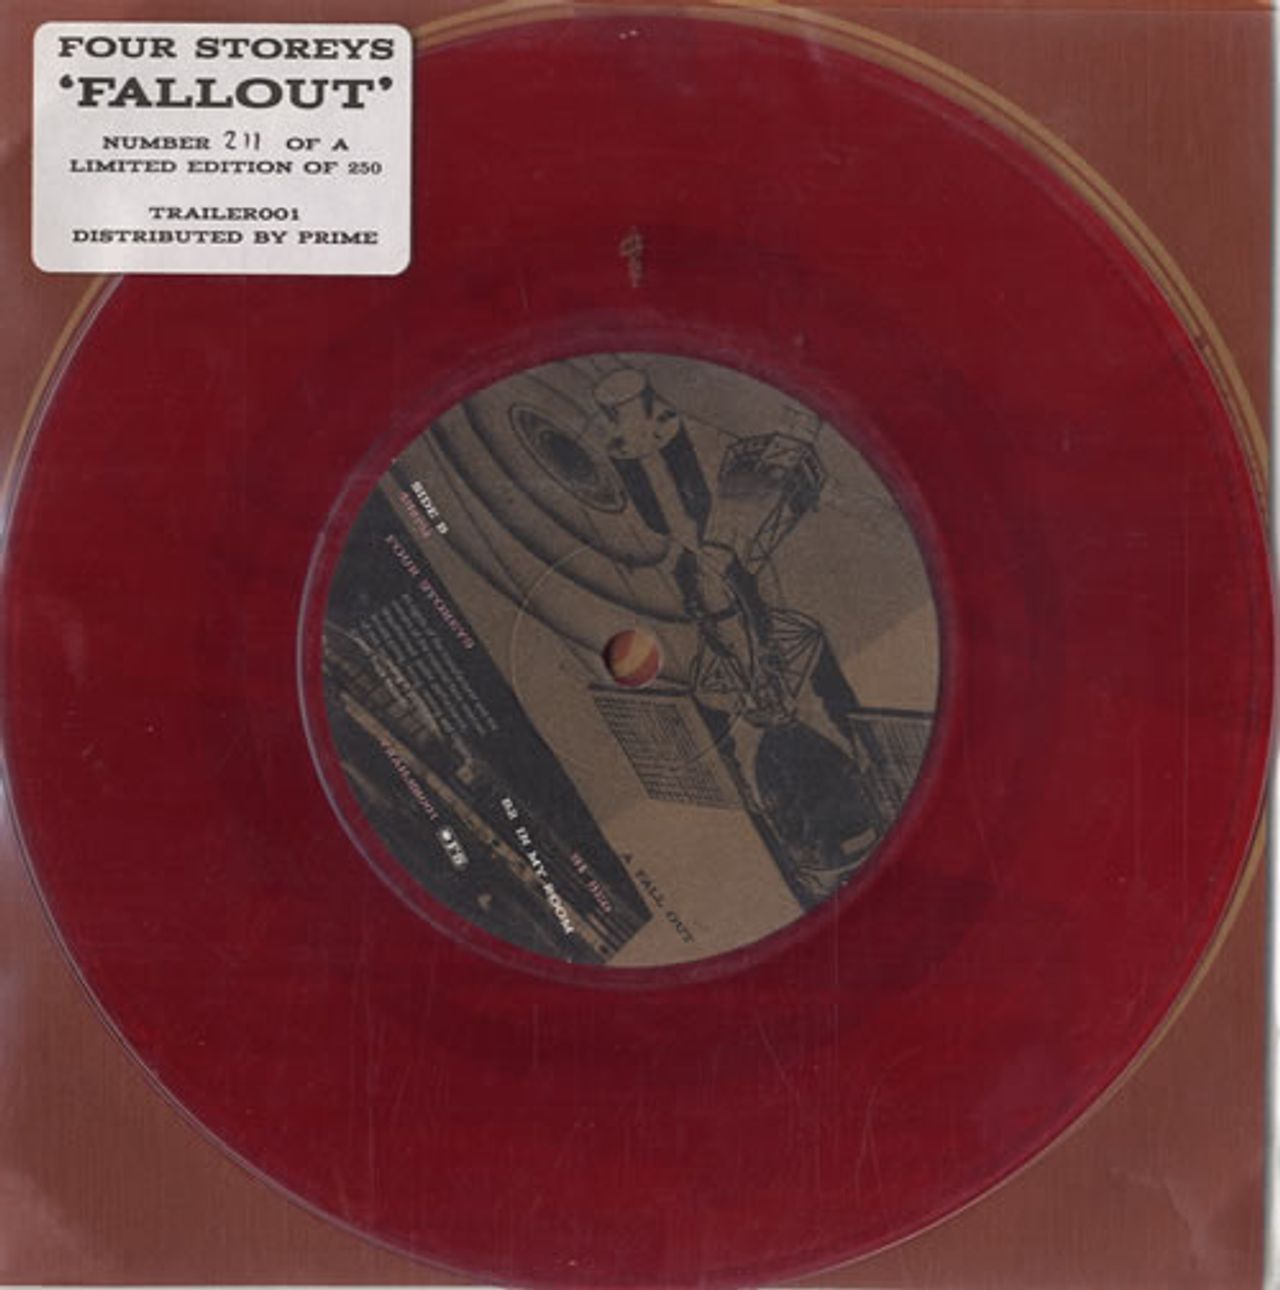 The Four Storeys Fallout - Red Vinyl UK 7 Vinyl Single Record TRAILER001 Truck Records 2000